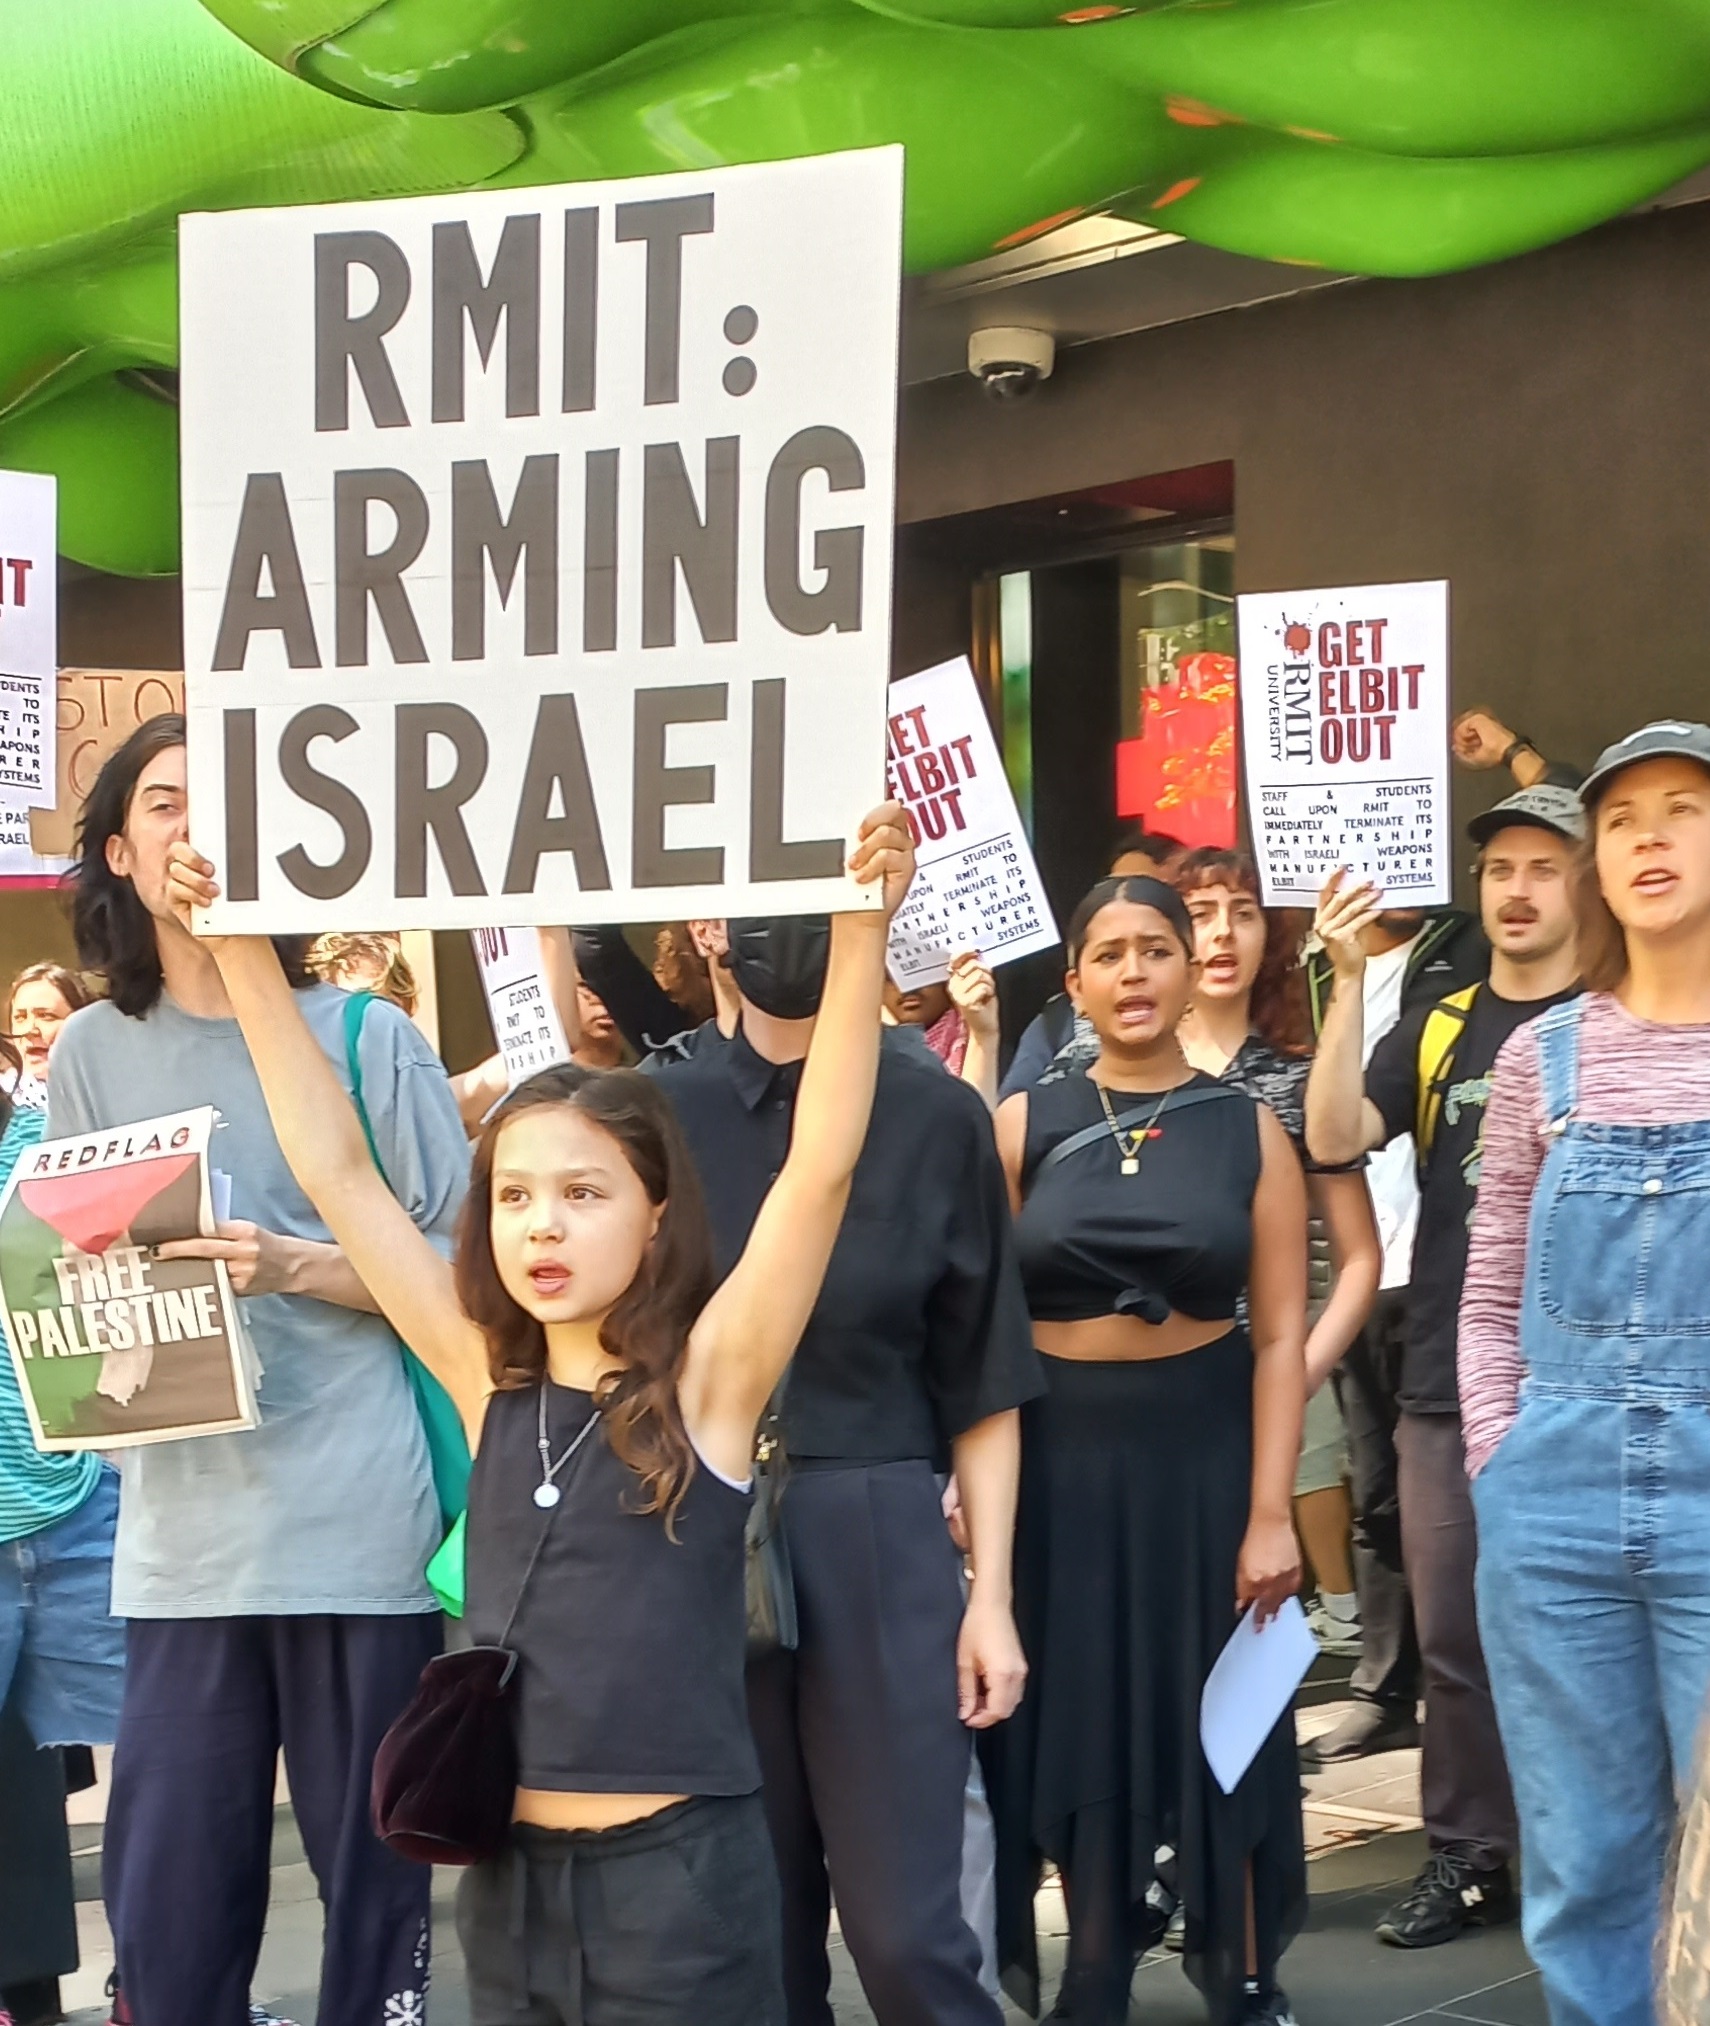 Elbit out of RMIT